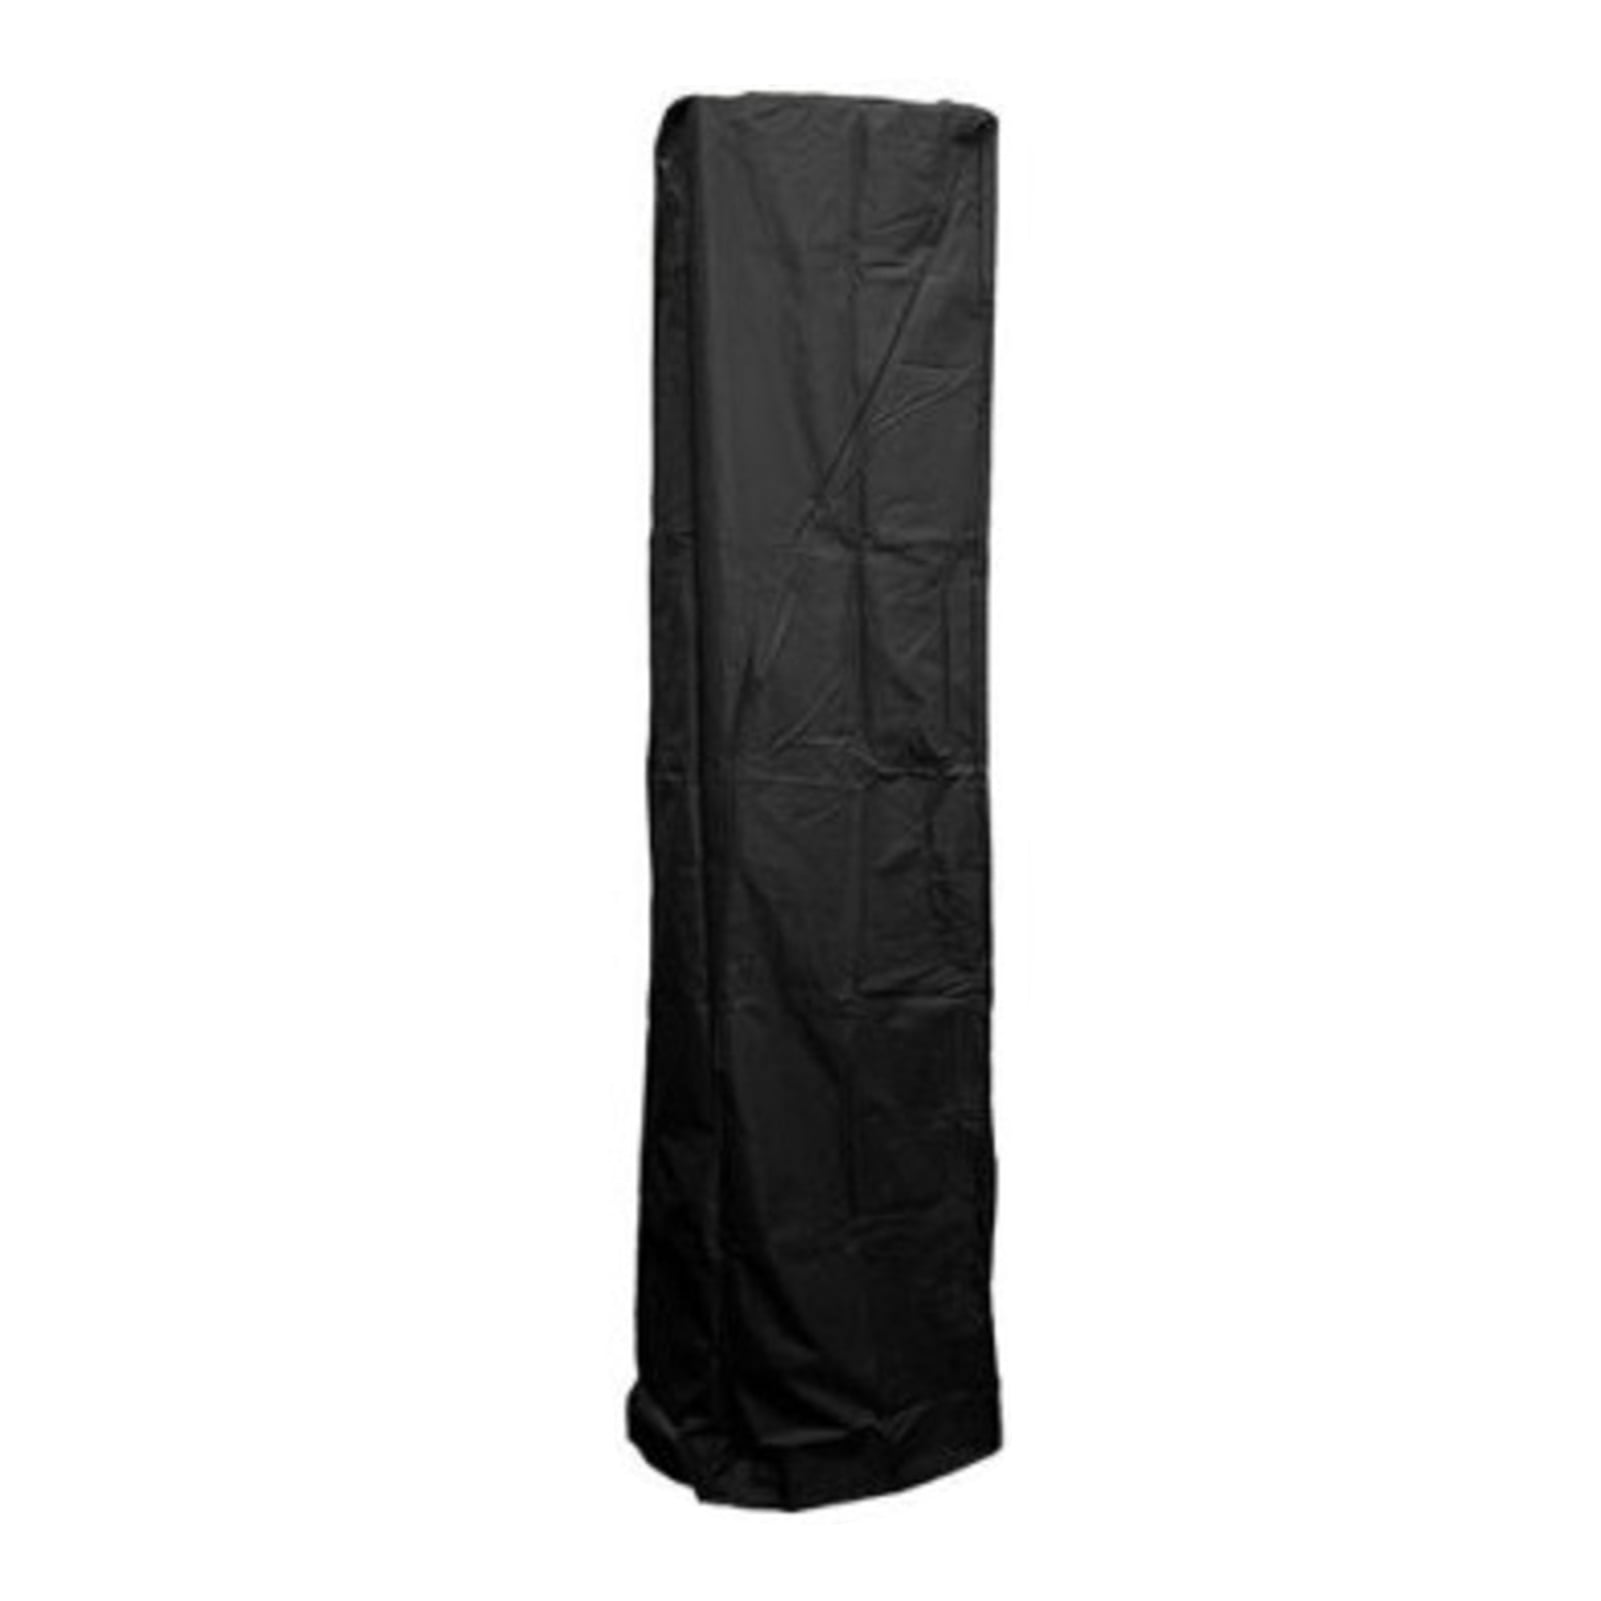 Black B Blesiya 87-95H Waterproof Garden Patio Heater Cover Heavy Duty Breathable Stand Up Patio Heater Cover 228x106x70cm 